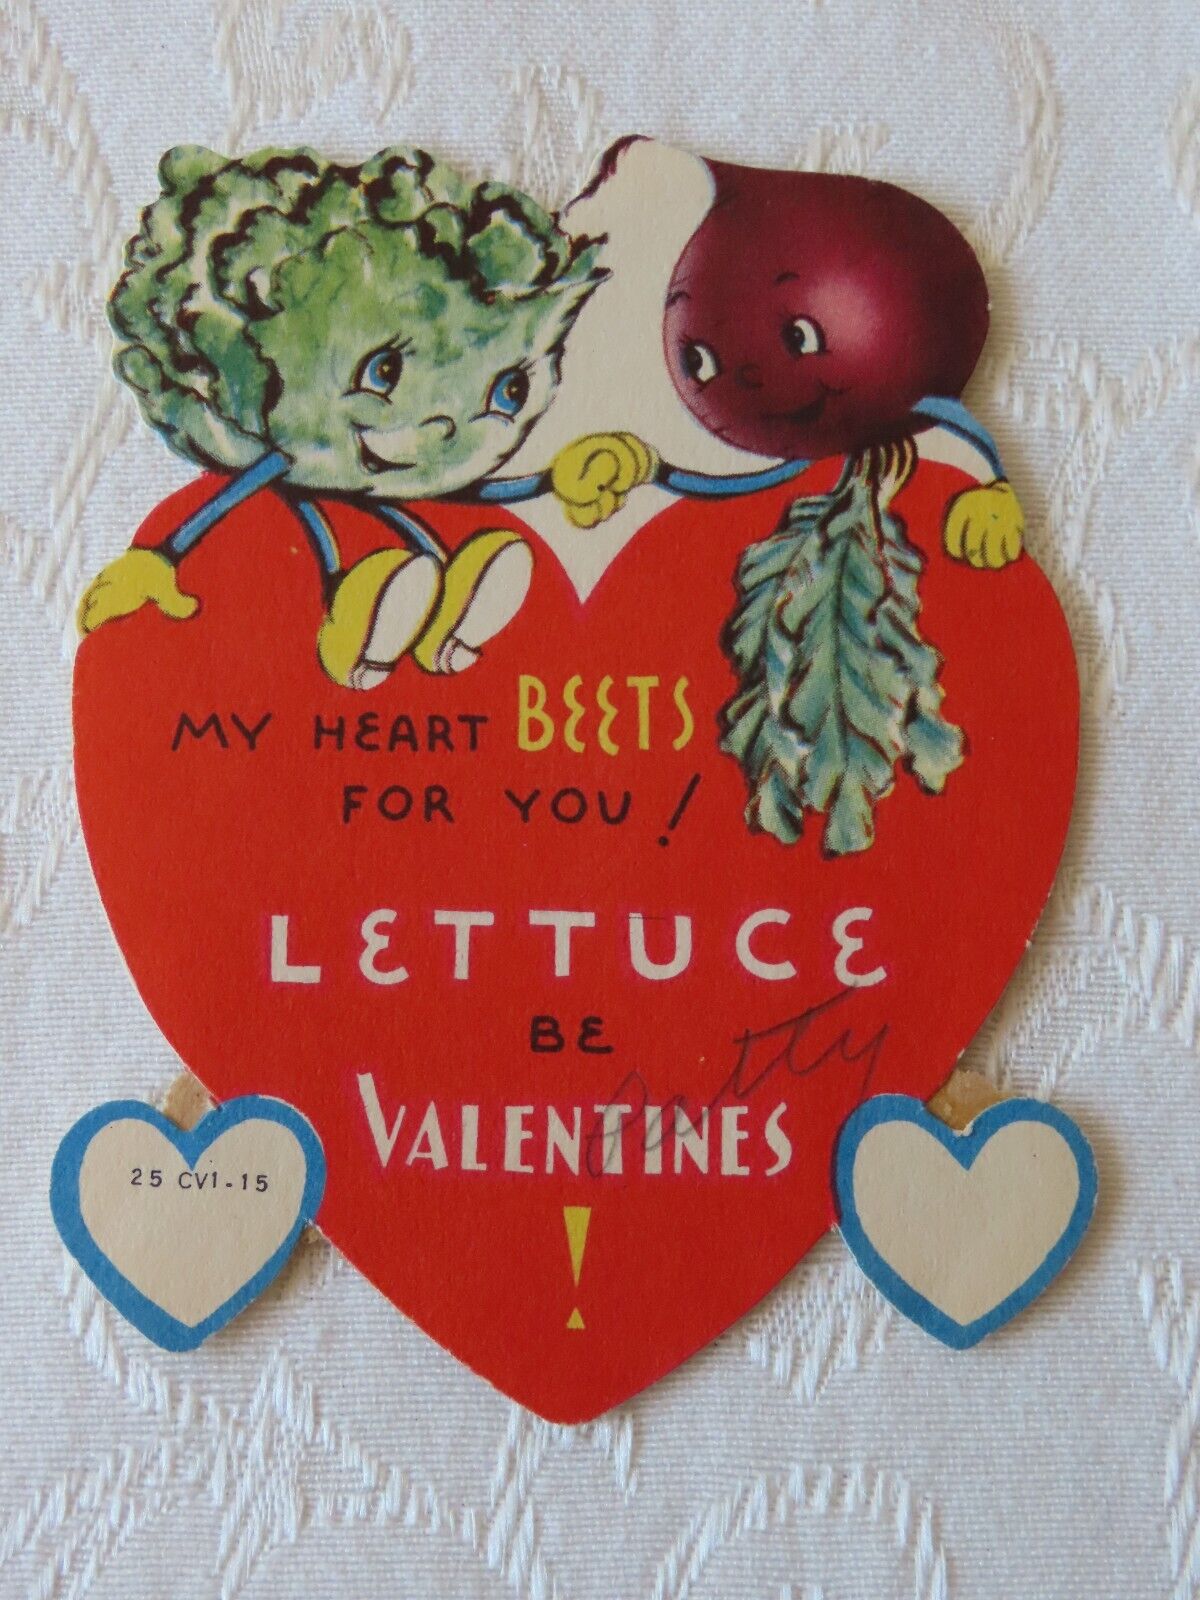 Vintage Valentine, Flat, Anthropomorphic, Lettuce and a Beet